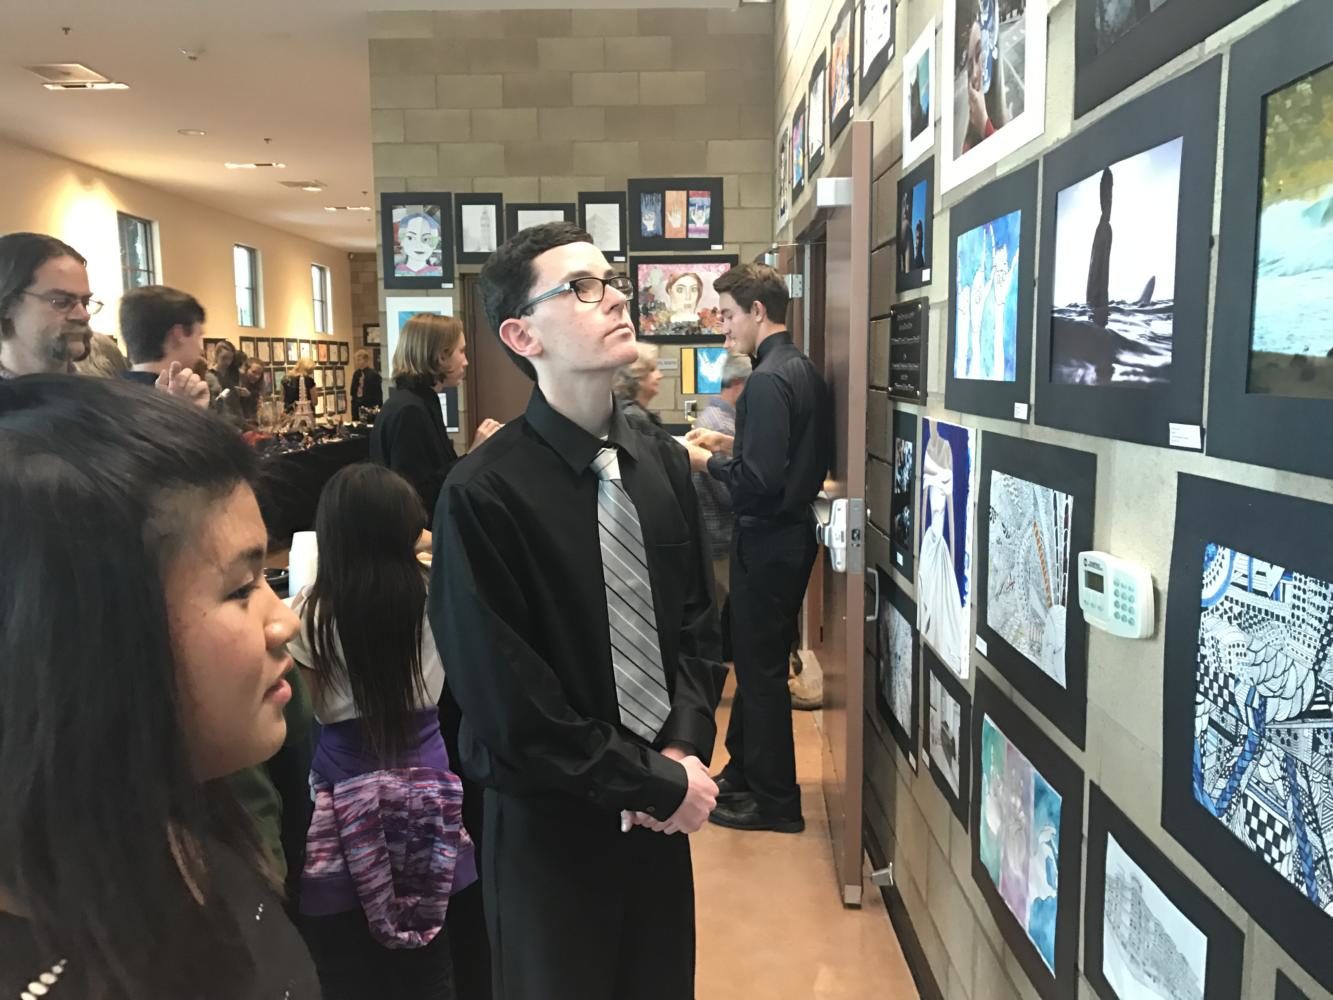 CCHS celebrated its annual Visual and Performing Arts Showcase last week to display school-wide talent. 